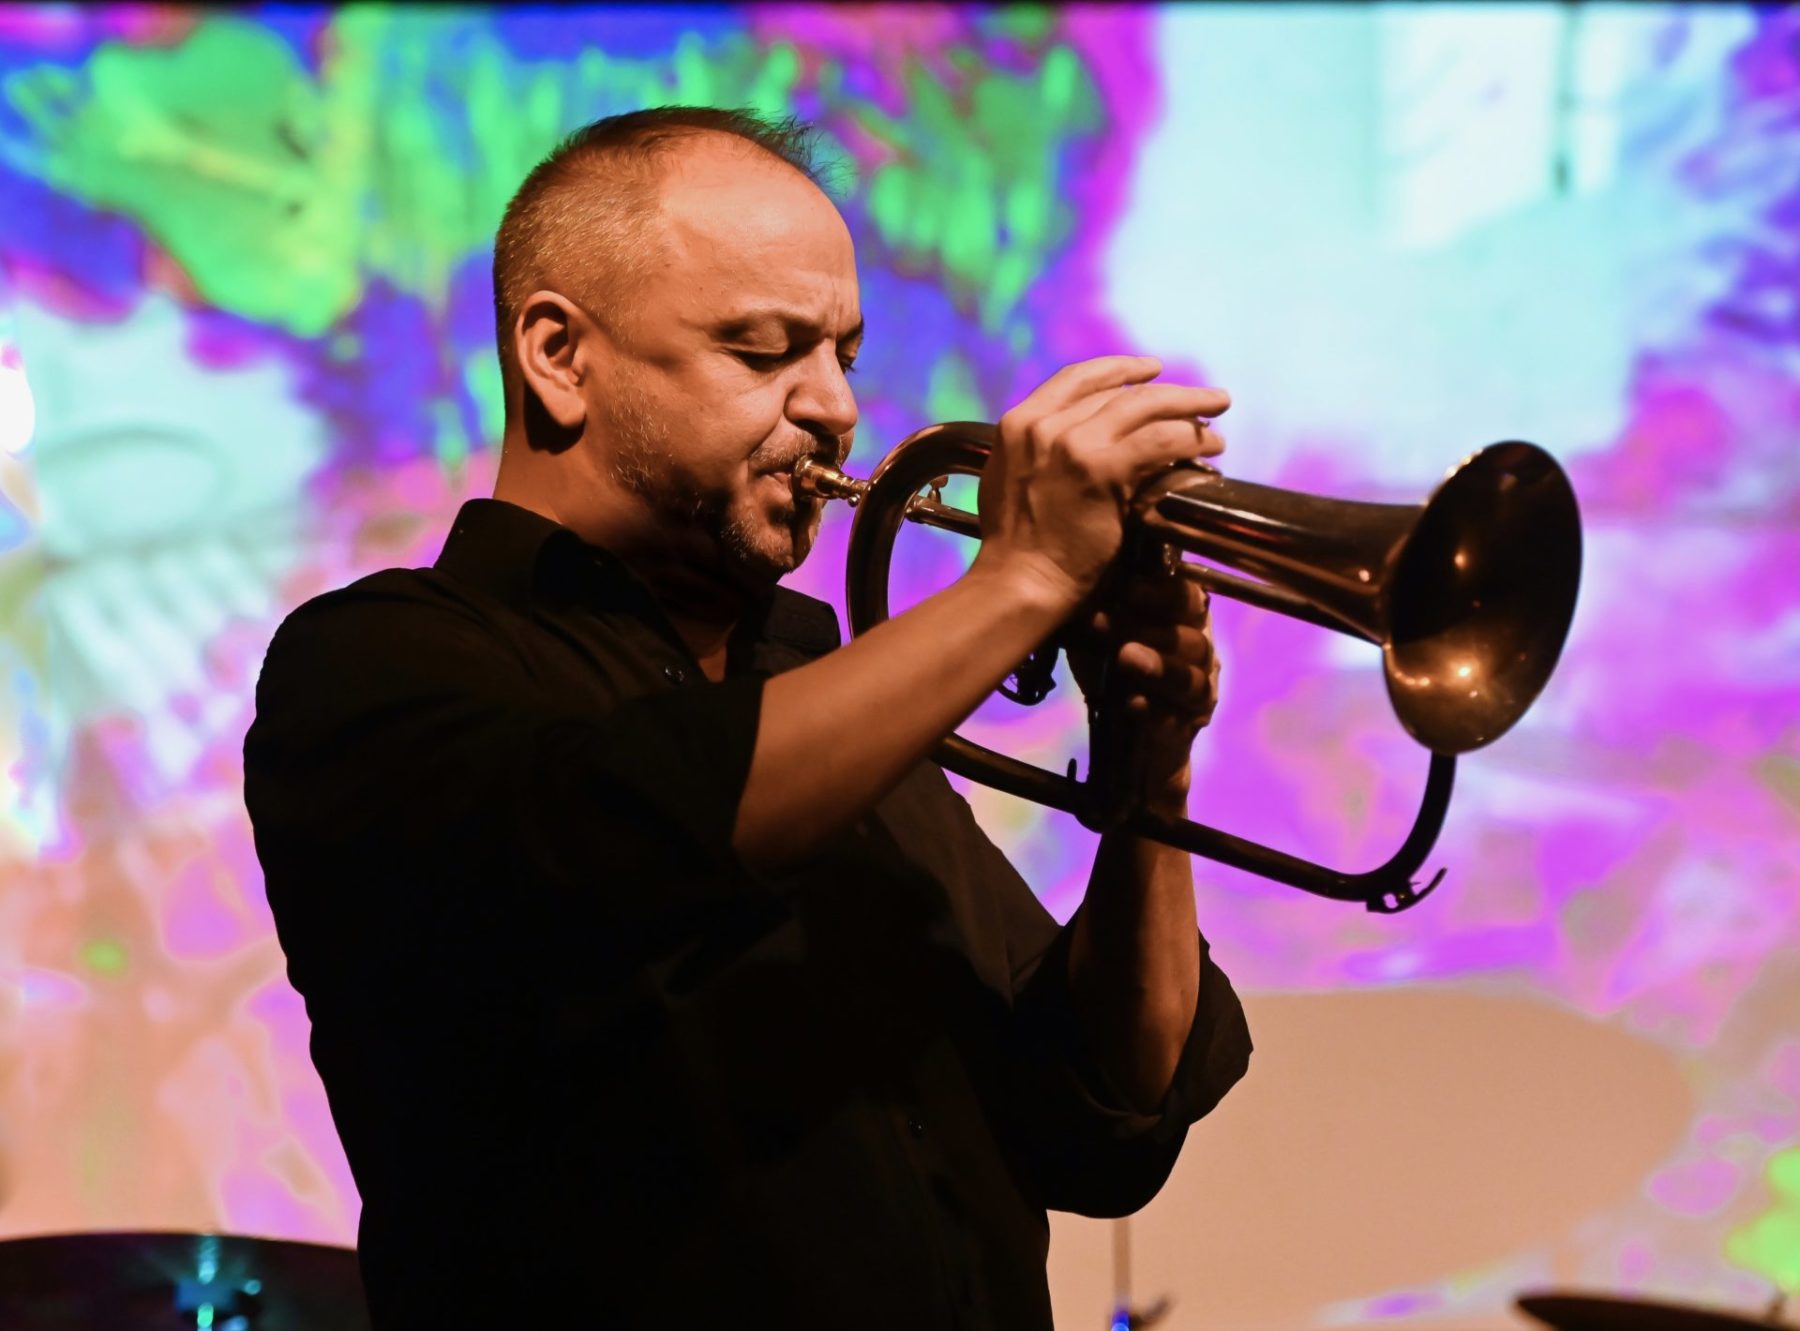 John Korsrud in a black shirt playing the trumpet in front of a multi-coloured screen